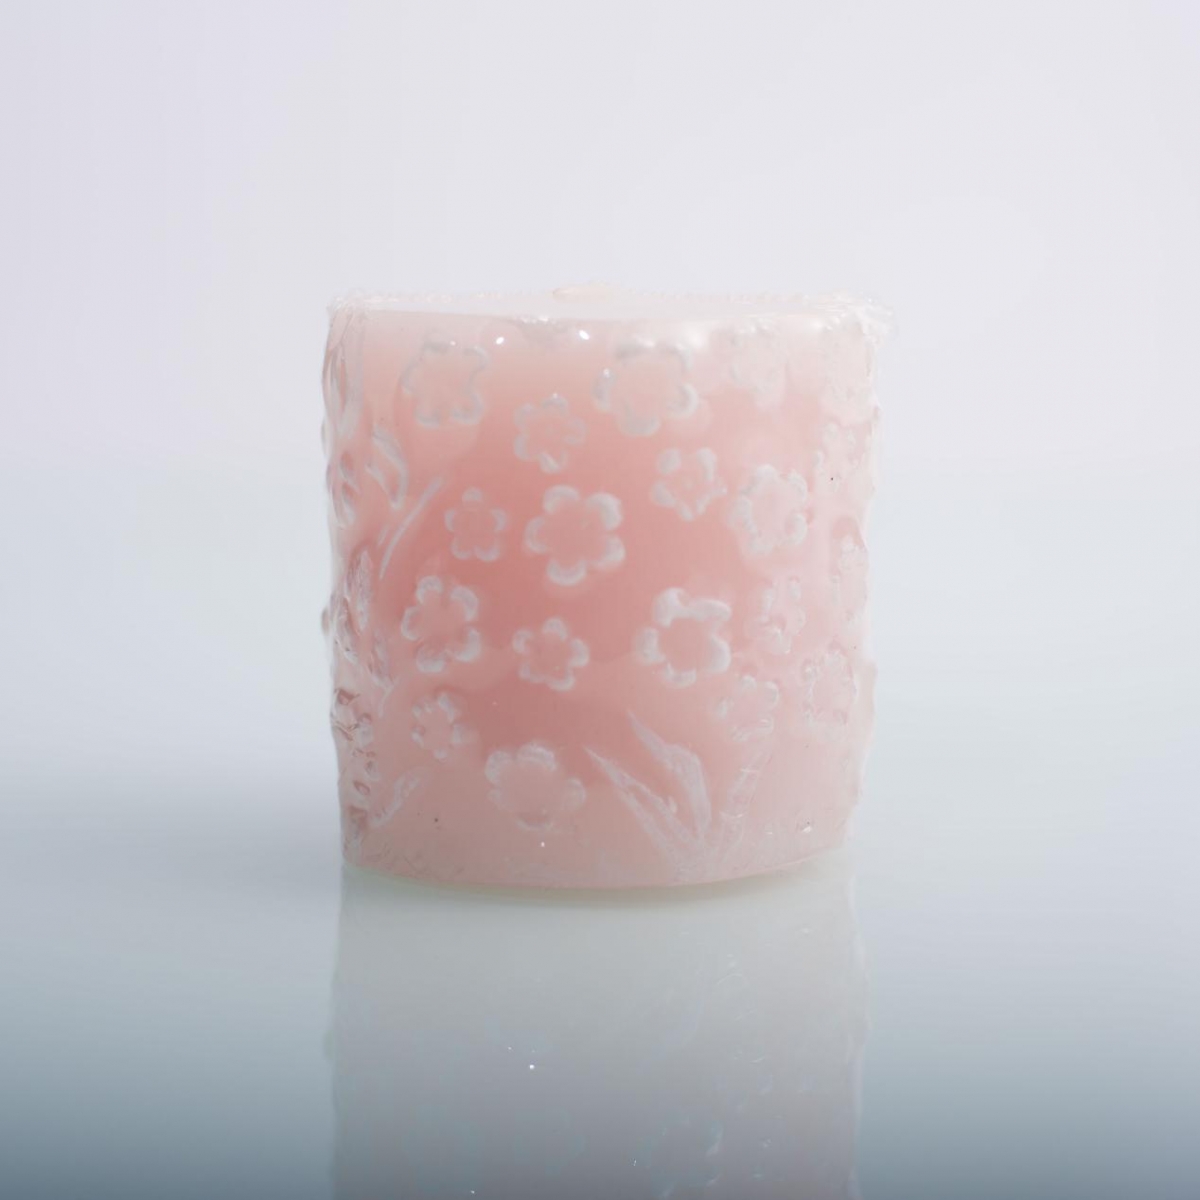 Small Pillar Candles：Plum Flower Carved ,Soild Colorful Pillar Candle ,Heat Shrink Wrap Package, China Factory ,Best Price-HOWCANDLE-Candles,Scented Candles,Aromatherapy Candles,Soy Candles,Vegan Candles,Jar Candles,Pillar Candles,Candle Gift Sets,Essential Oils,Reed Diffuser,Candle Holder,